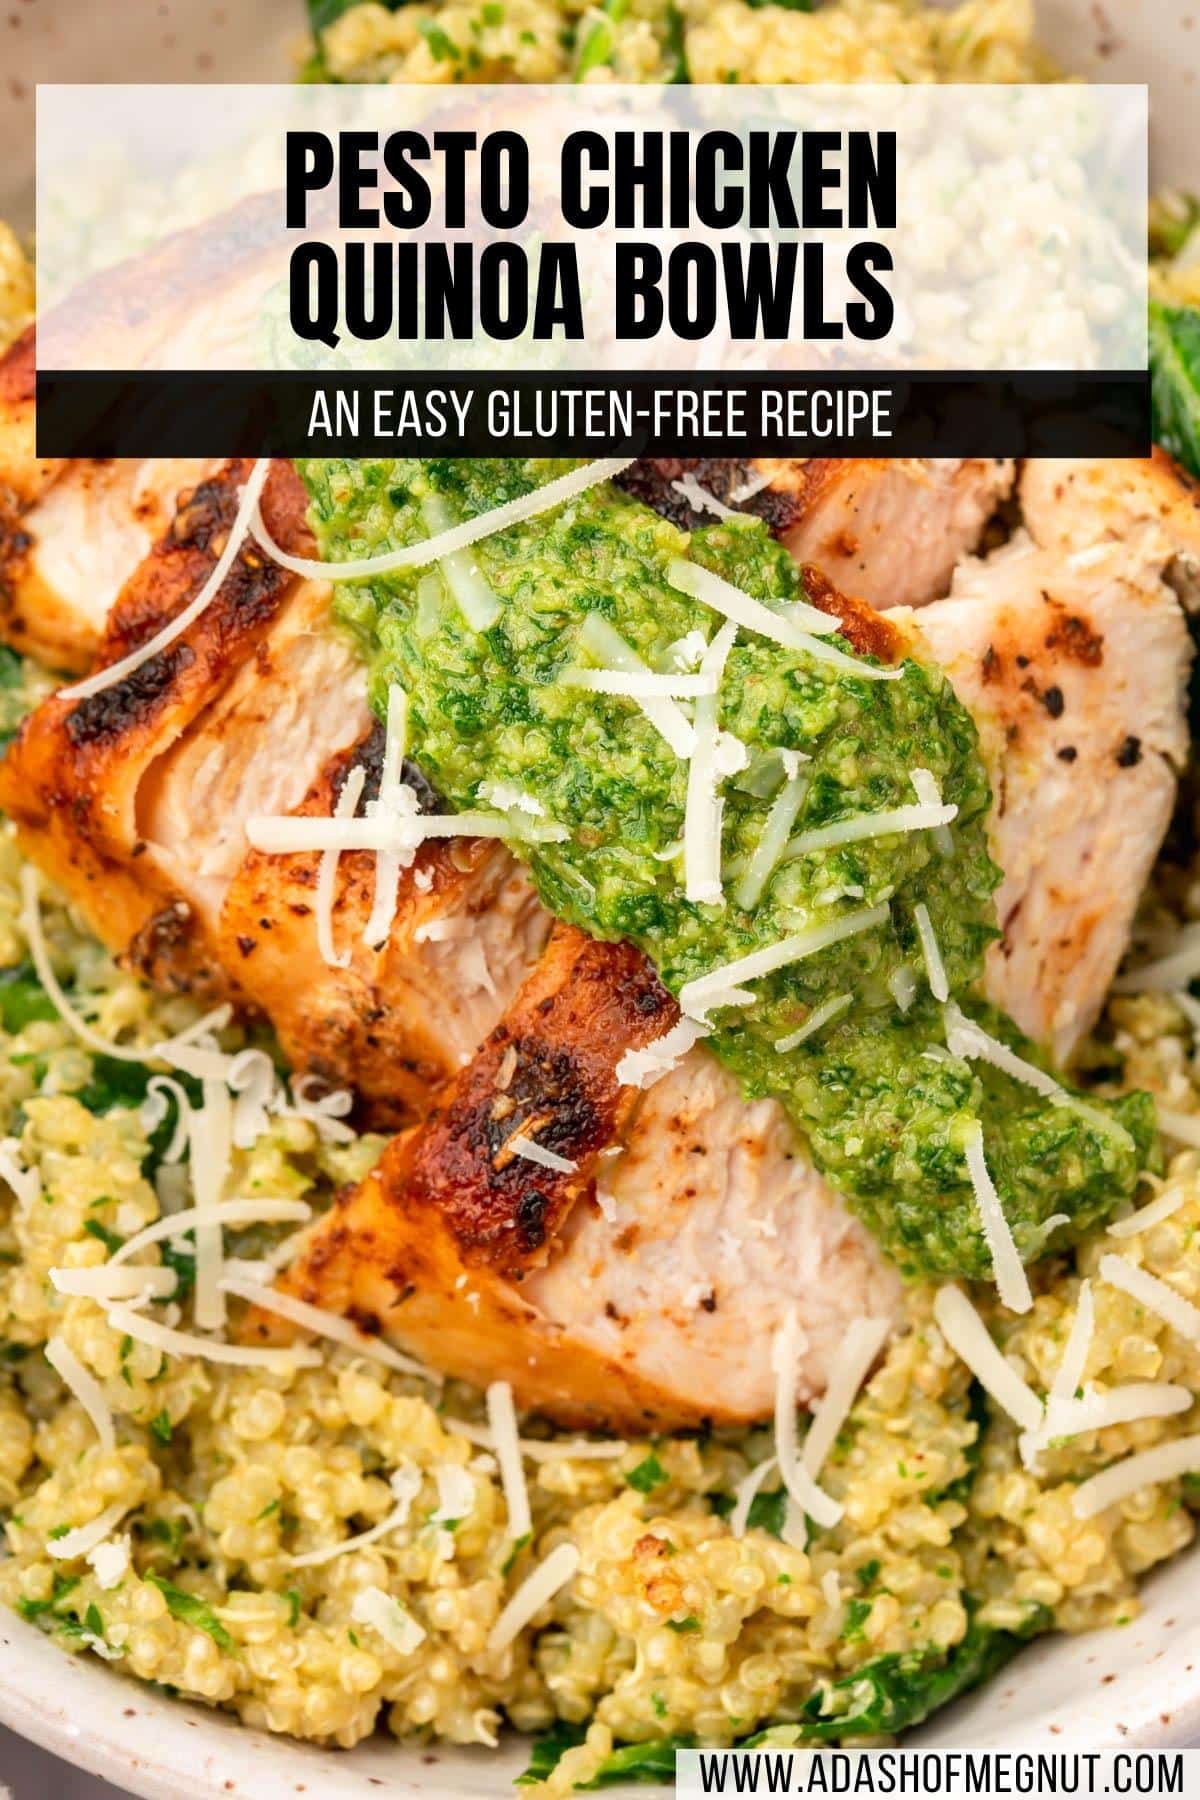 A bowl of pesto chicken quinoa bowls topped with pesto and shredded parmesan with a text overlay over the image.